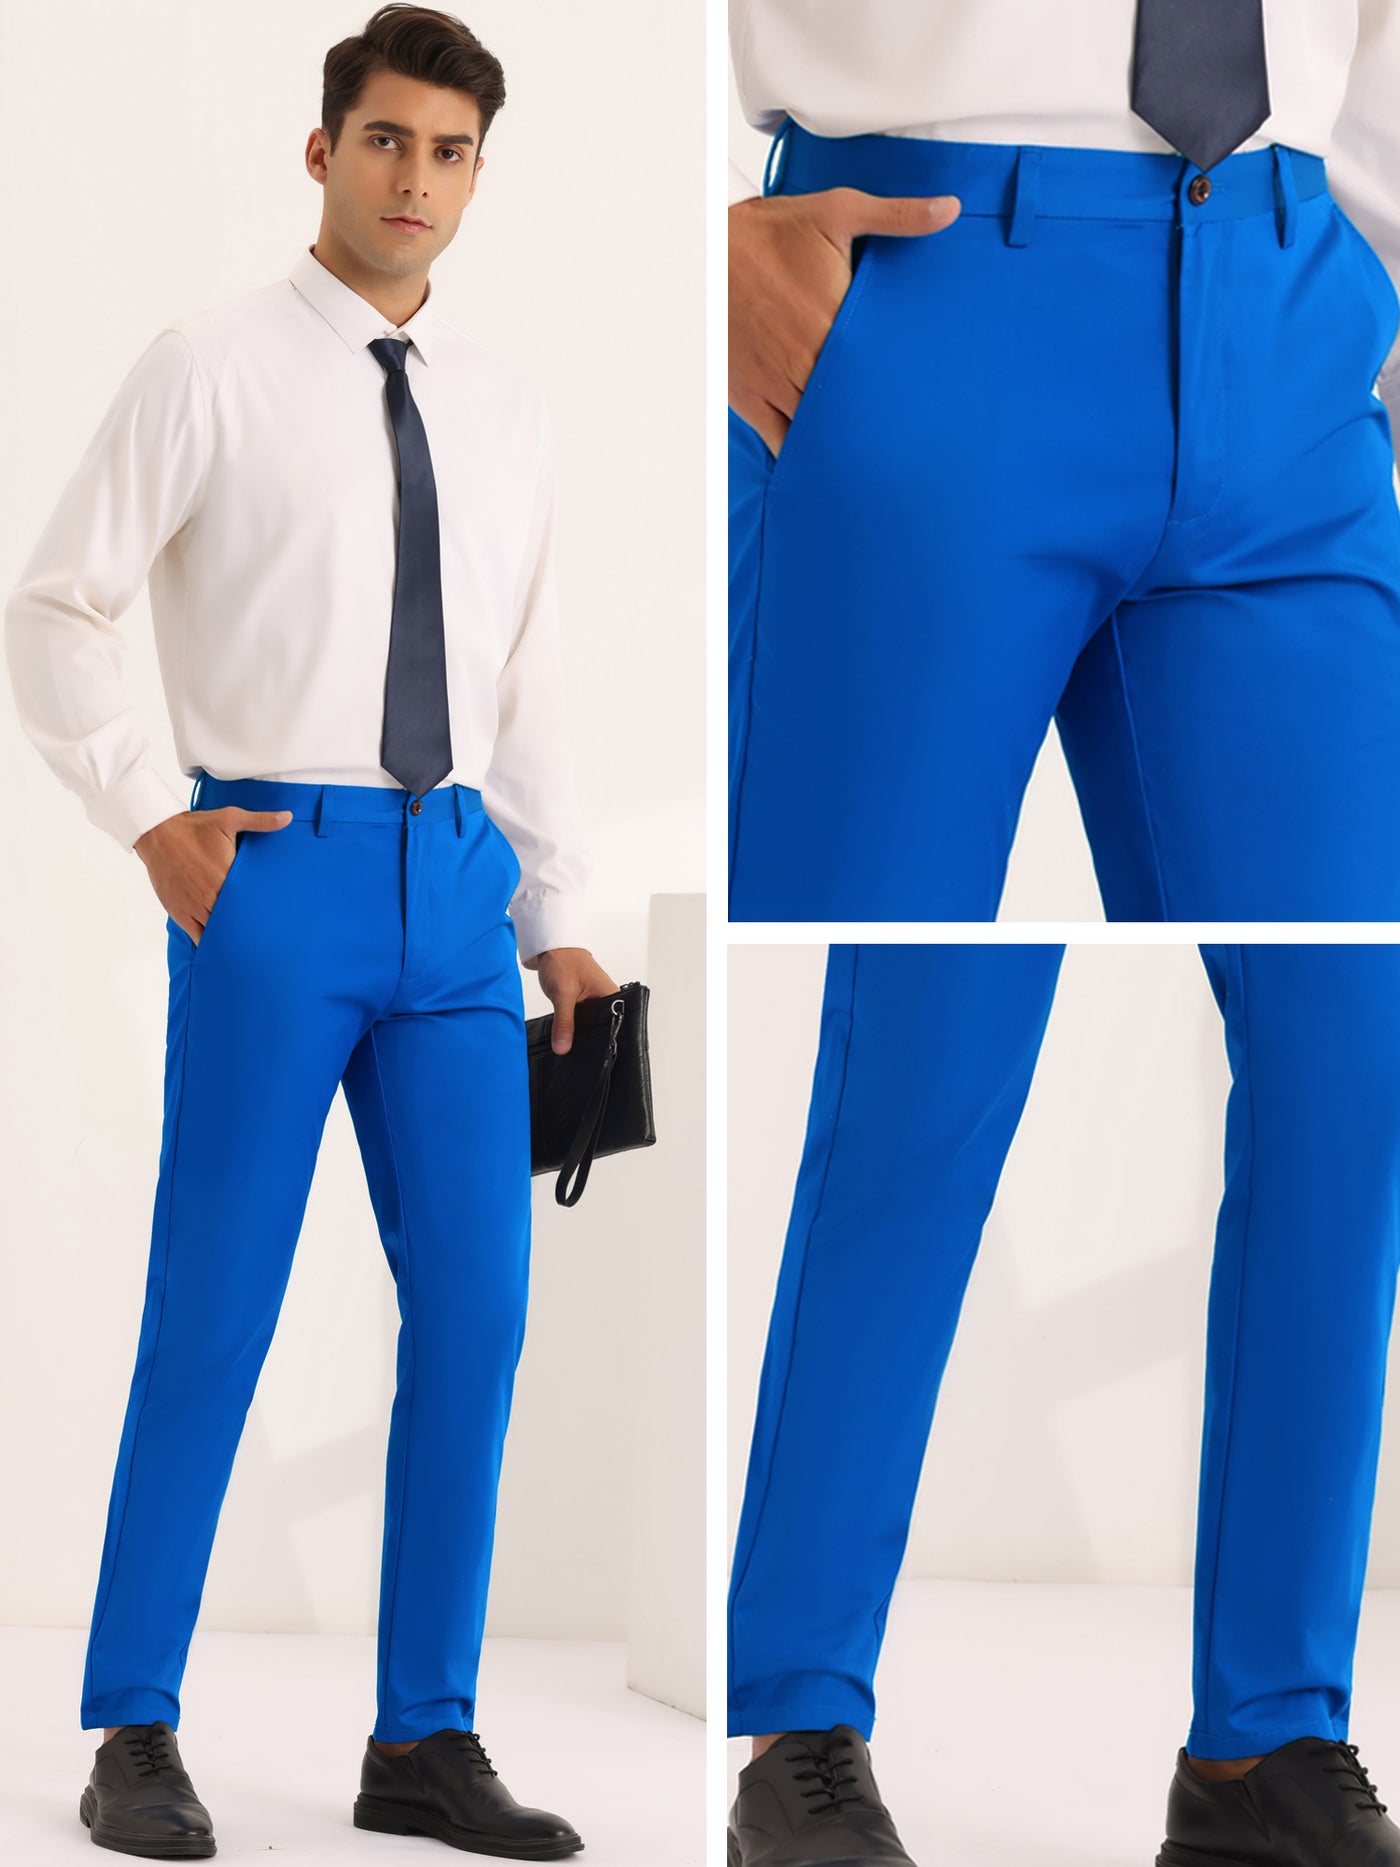 Bublédon Dress Pants for Men's Solid Slim Fit Stretch Flat Front Work Chino Trousers